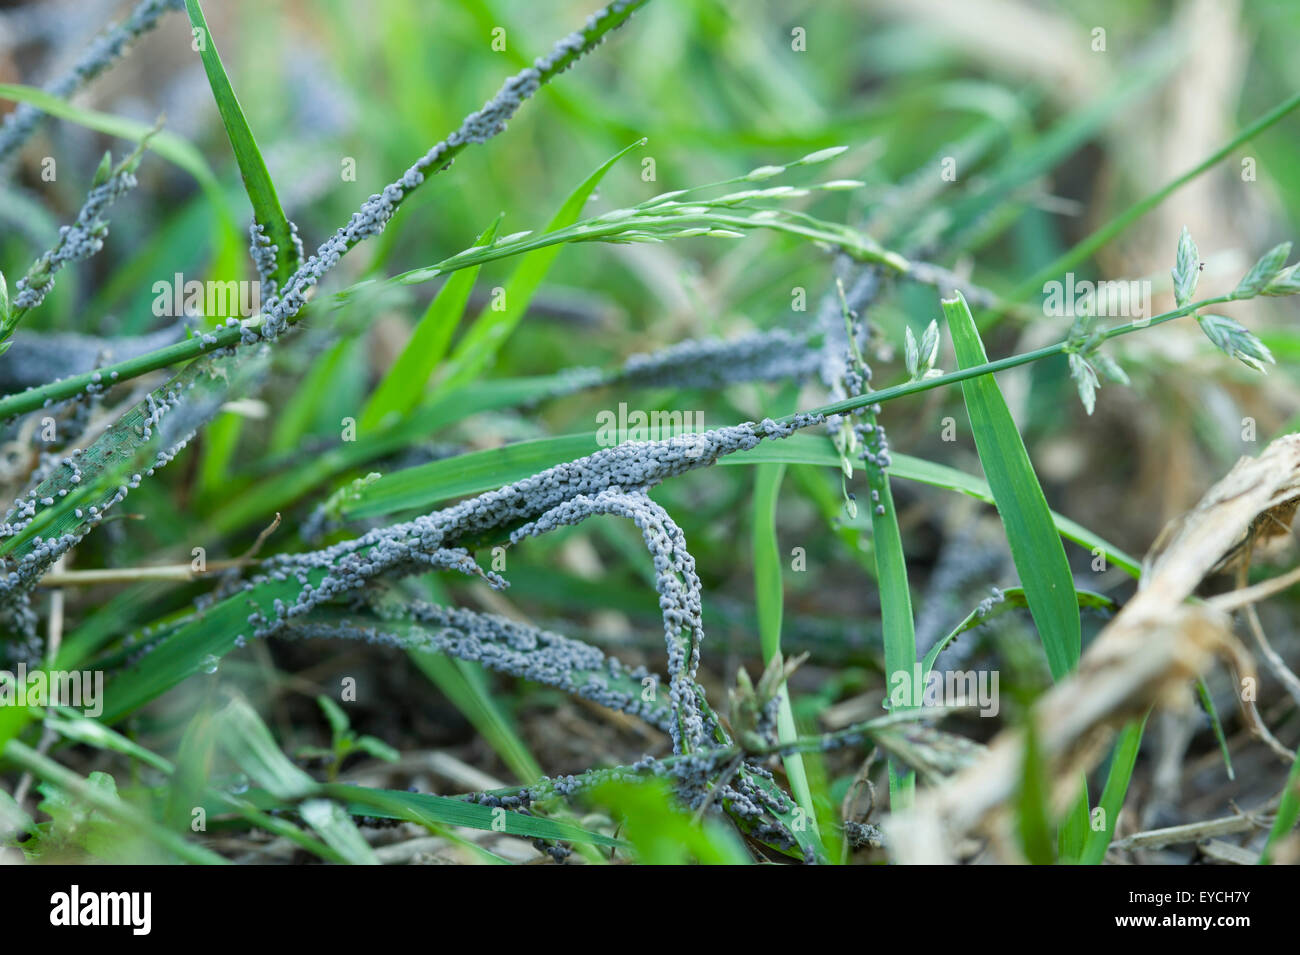 Grey slime mould on lawn grass Stock Photo